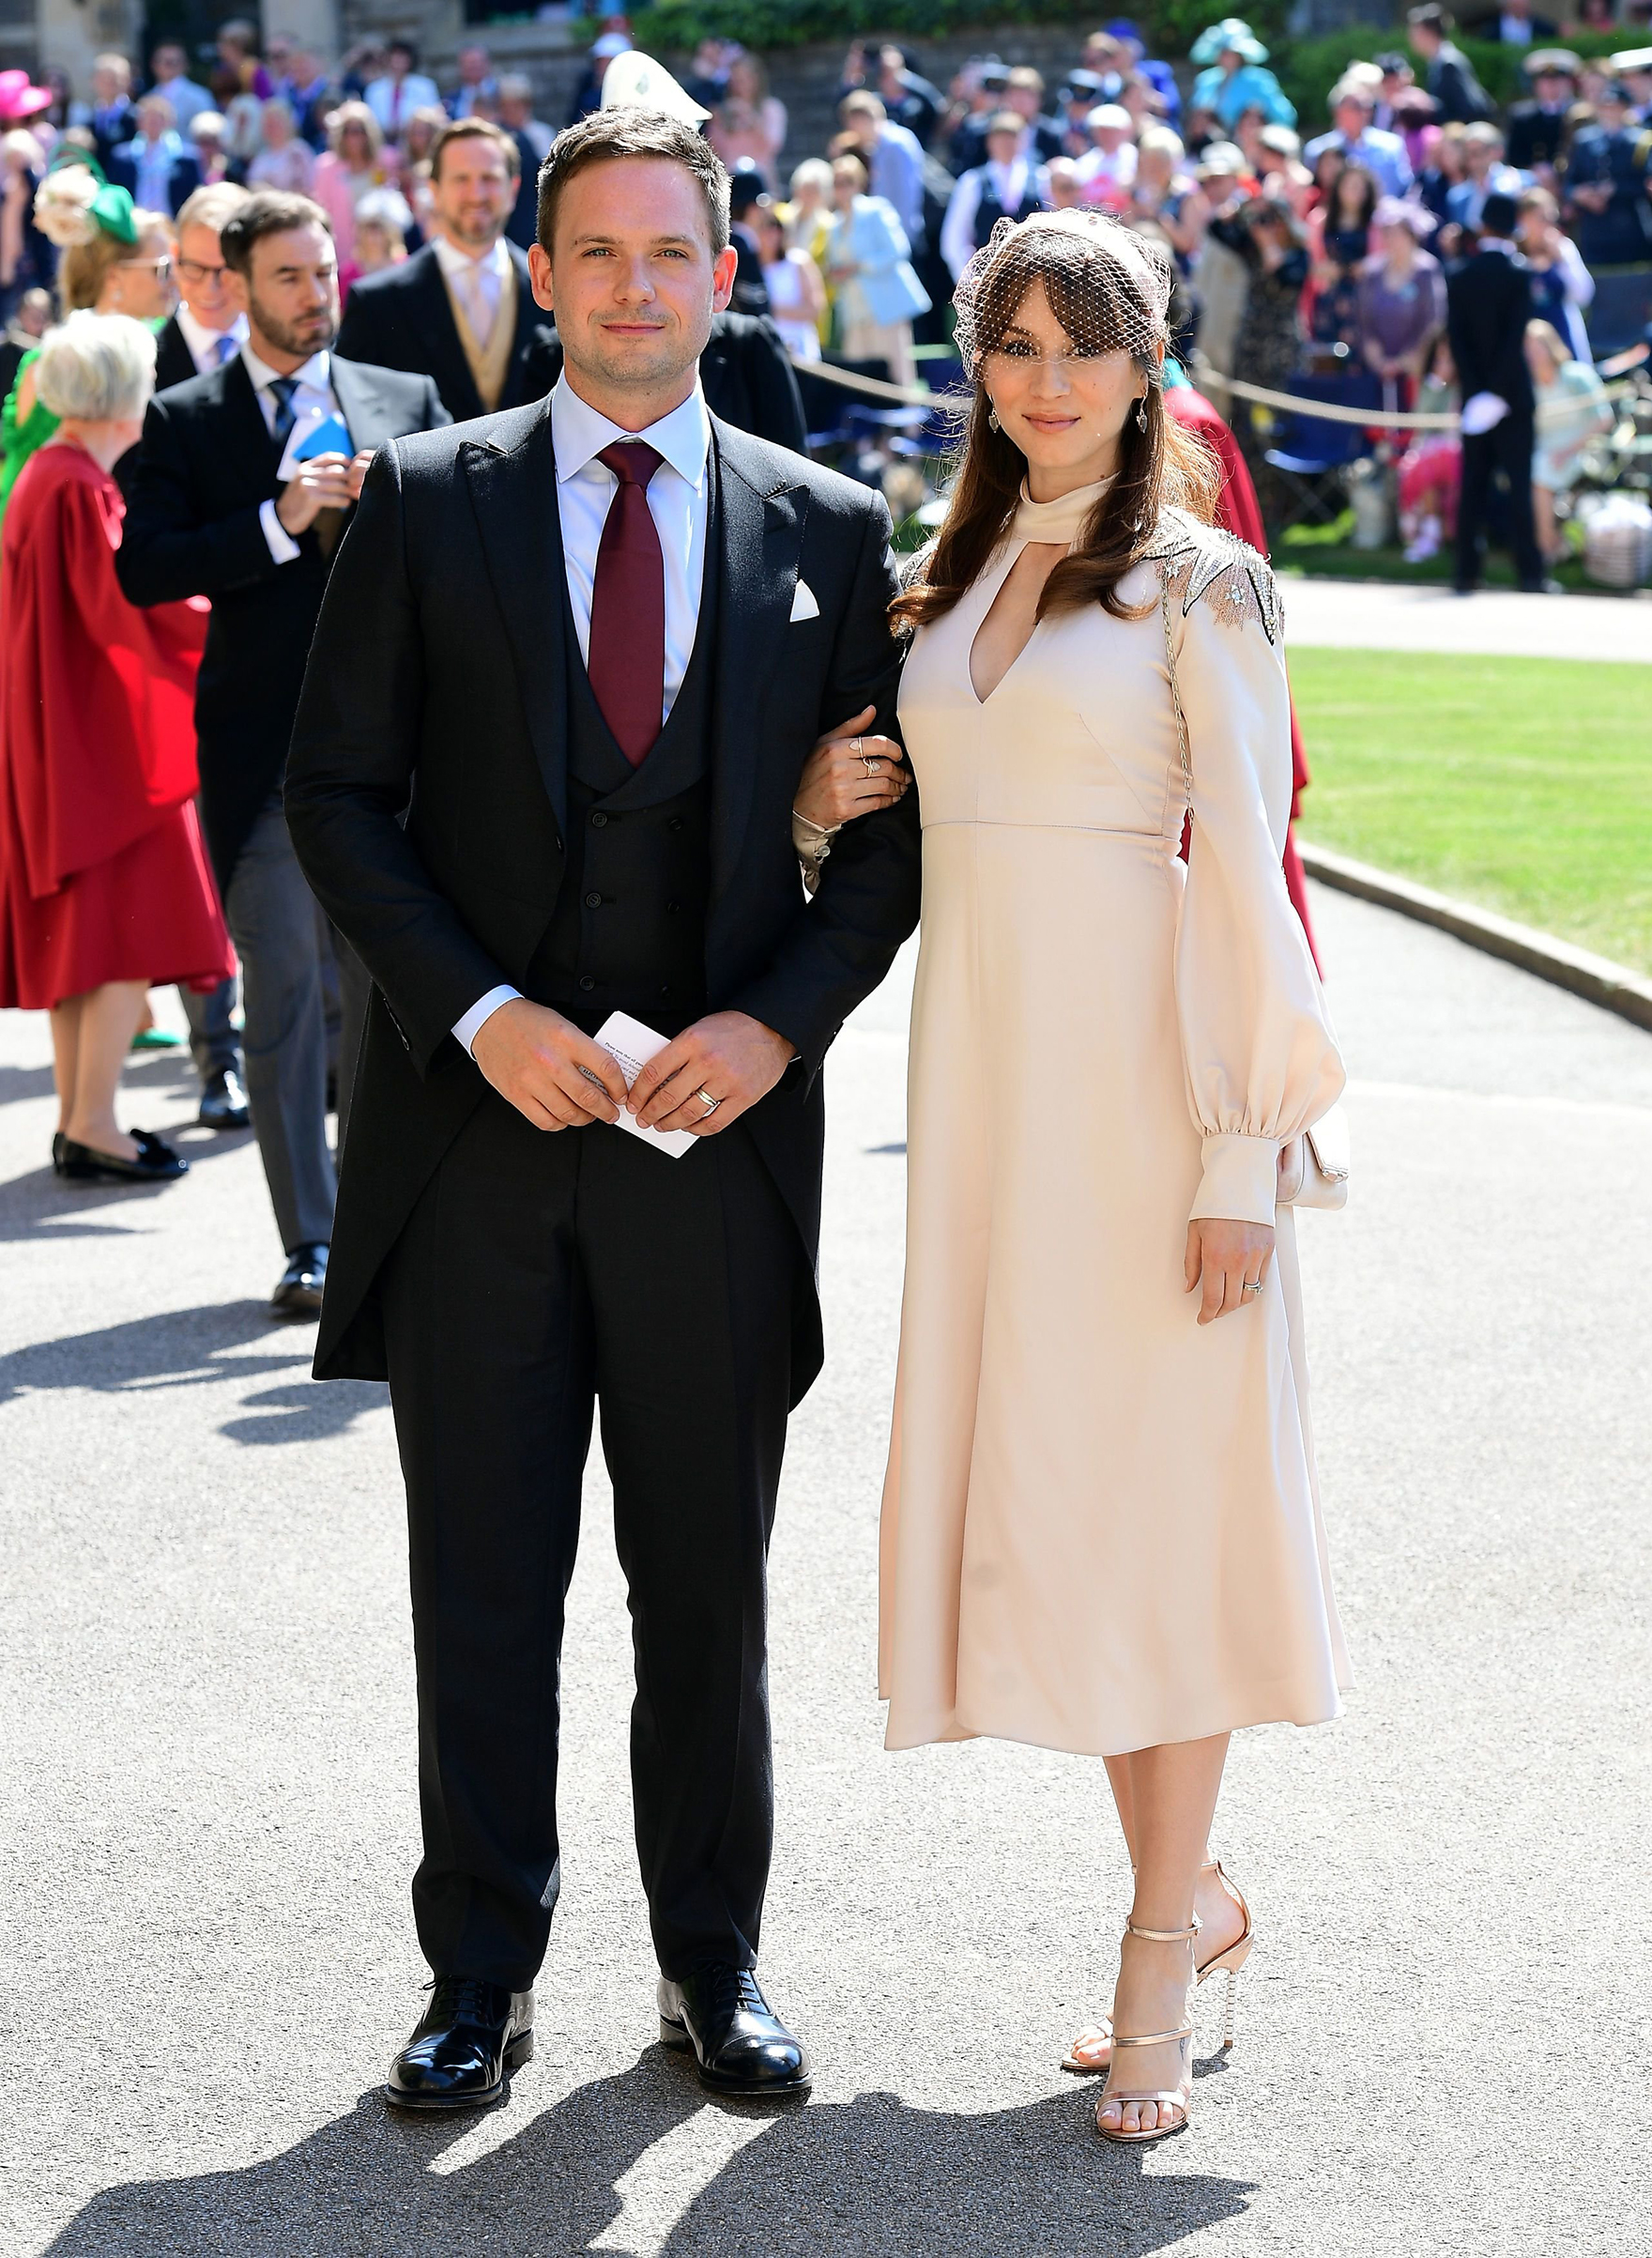 Patrick J. Adams and Troian Bellisario arrive for the wedding ceremony of Prince Harry, Duke of Sussex and Meghan Markle at St George's Chapel, Windsor Castle, in Windsor, on May 19, 2018.